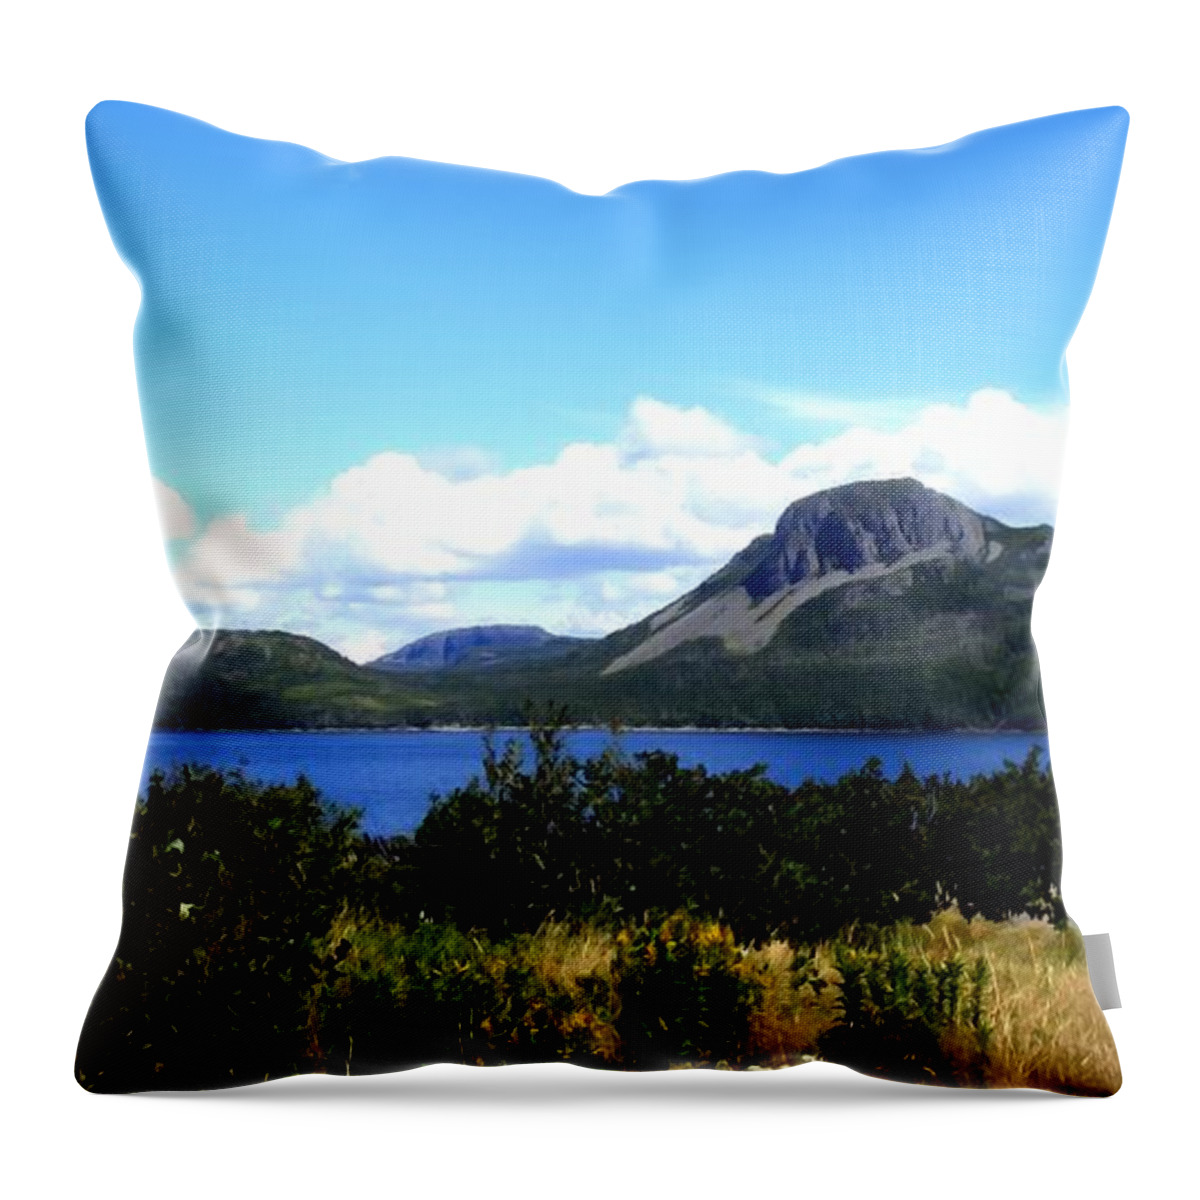 Sugarloaf Hill Brushstrokes Painting Throw Pillow featuring the photograph Sugarloaf Hill Brushstrokes Painting by Barbara A Griffin